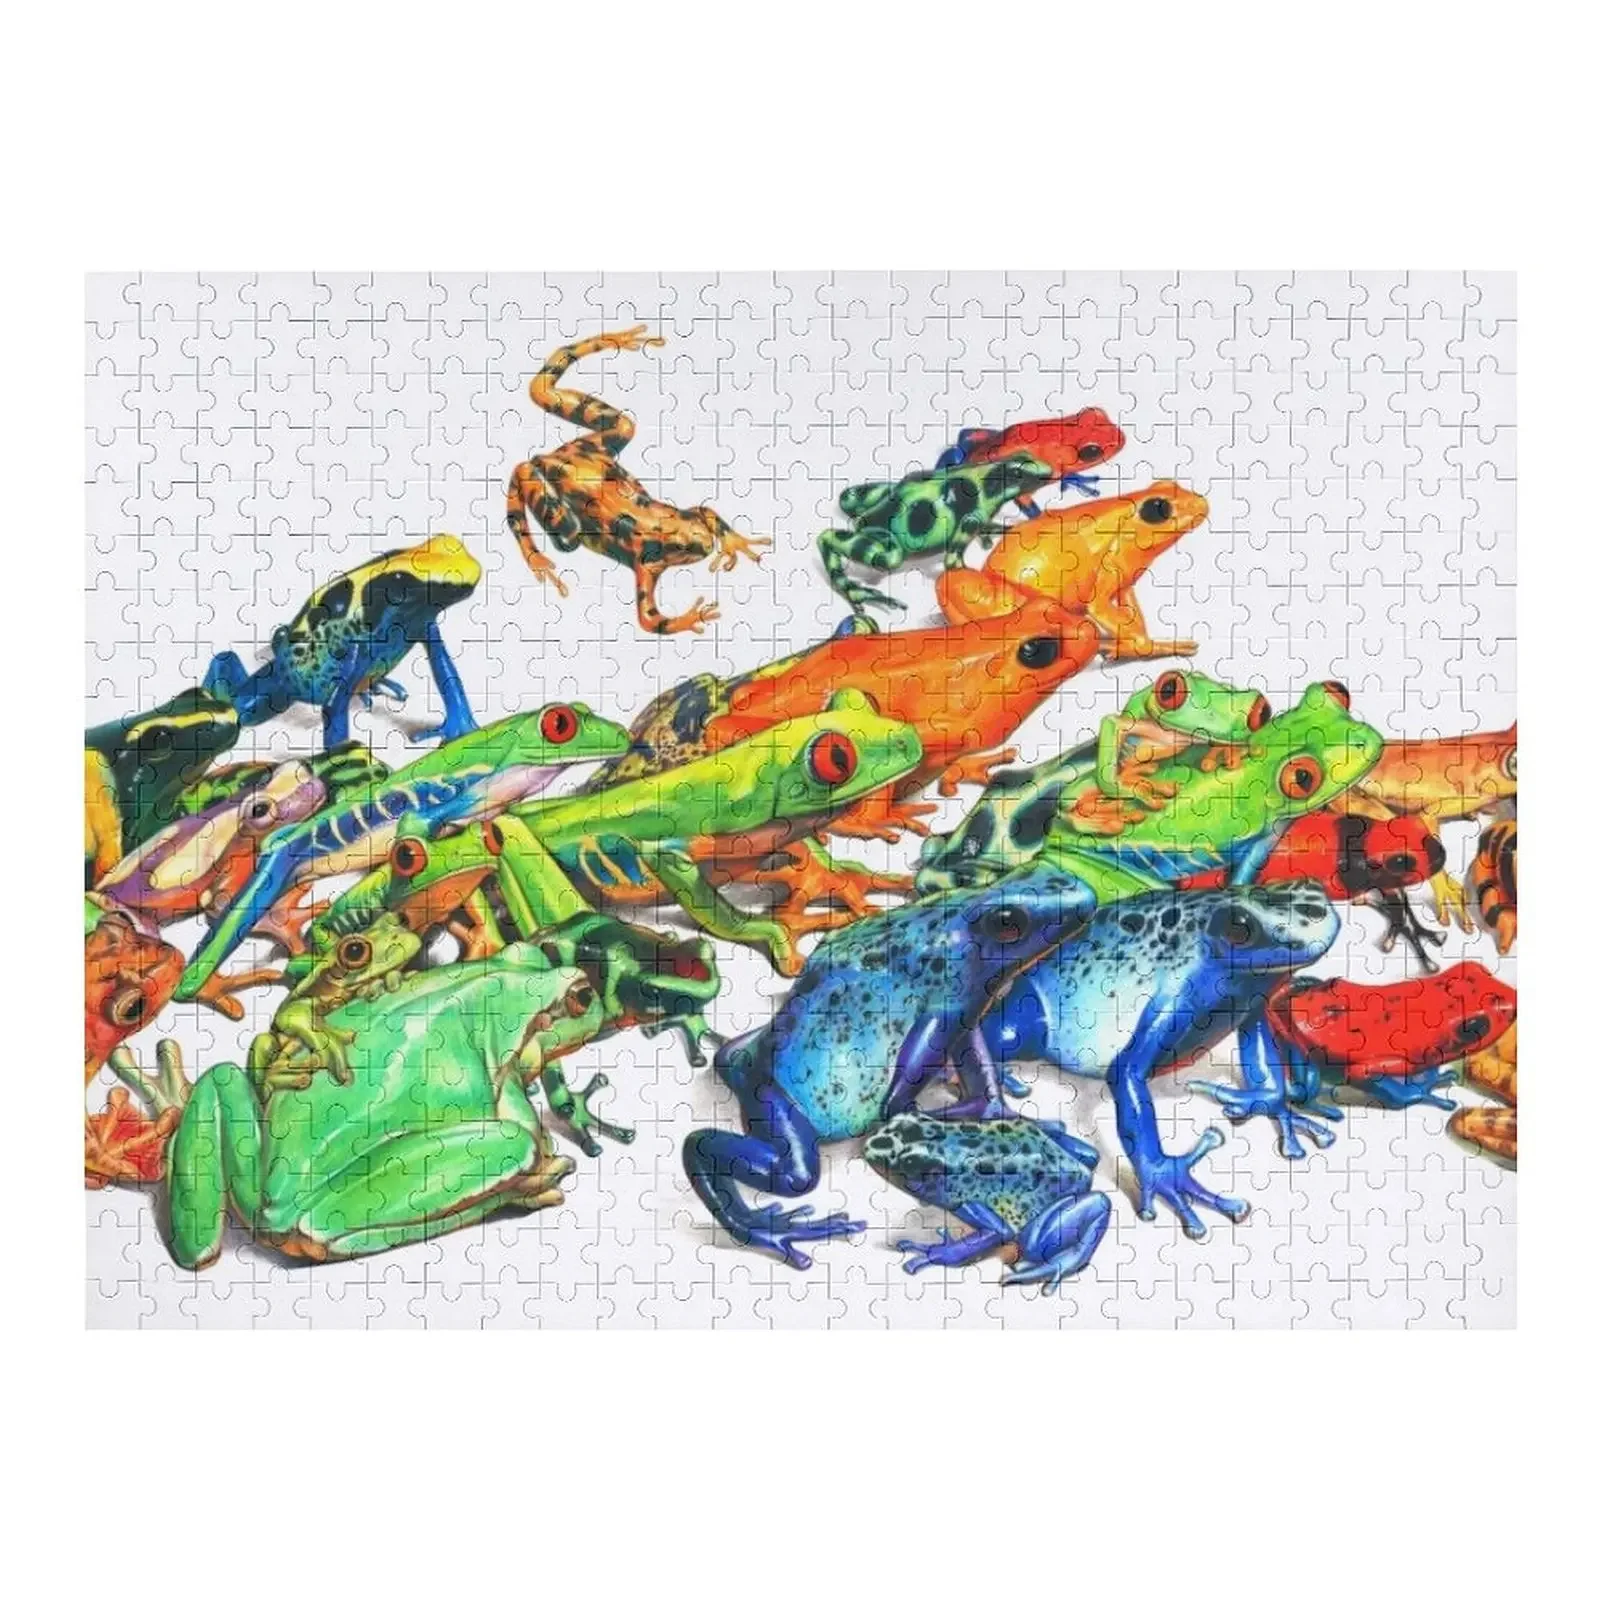 Tropical Frog Collage Jigsaw Puzzle Wooden Name Custom Personalized Personalized Custom Child Gift Personalized Name Puzzle dylan obrien abstract rectangular collage pattern jigsaw puzzle personalized custom child photo personalized gifts puzzle